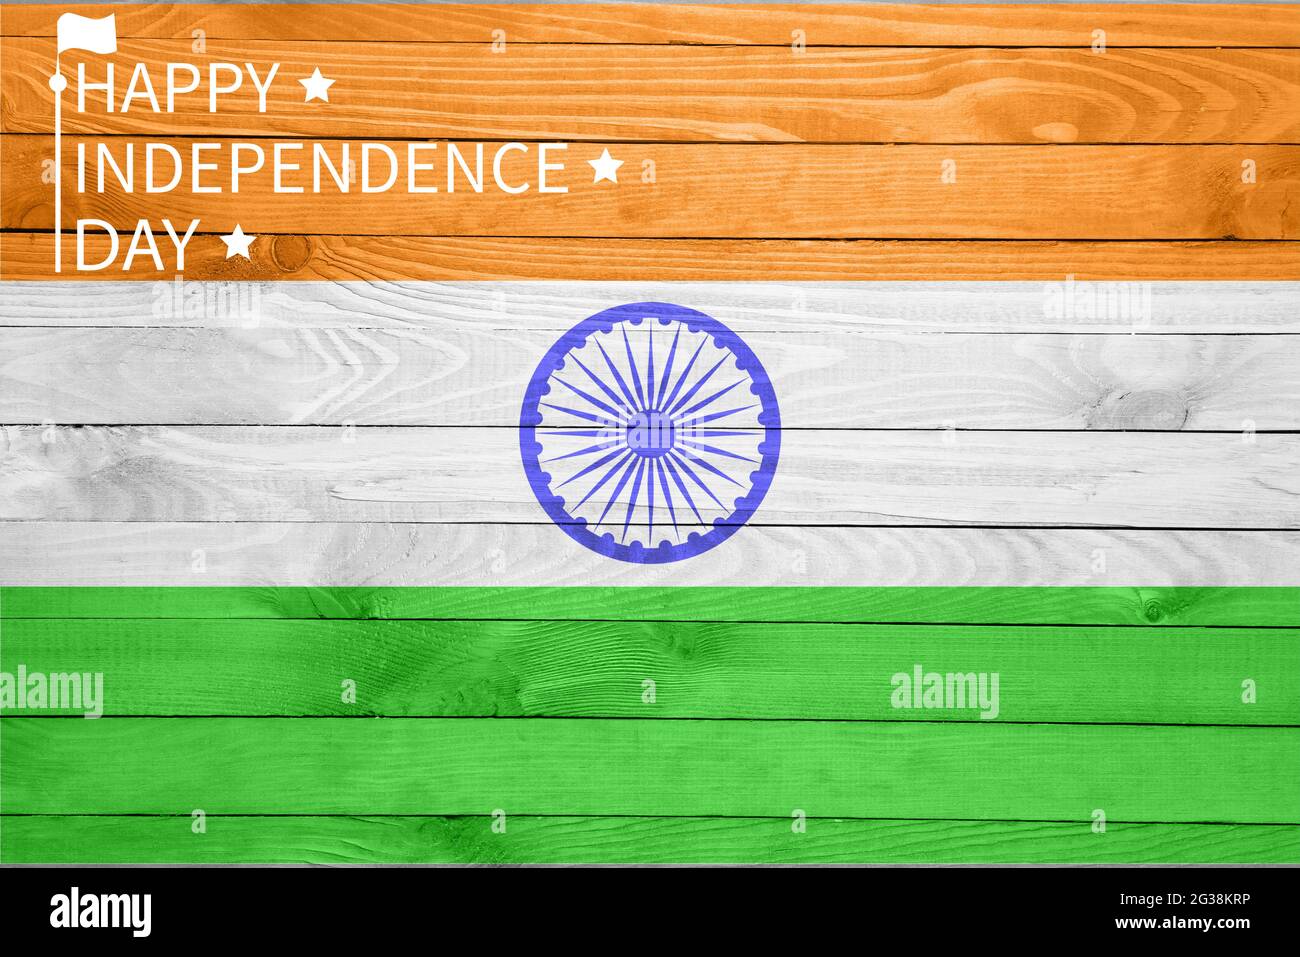 Text HAPPY INDEPENDENCE DAY and national flag of India on wooden ...